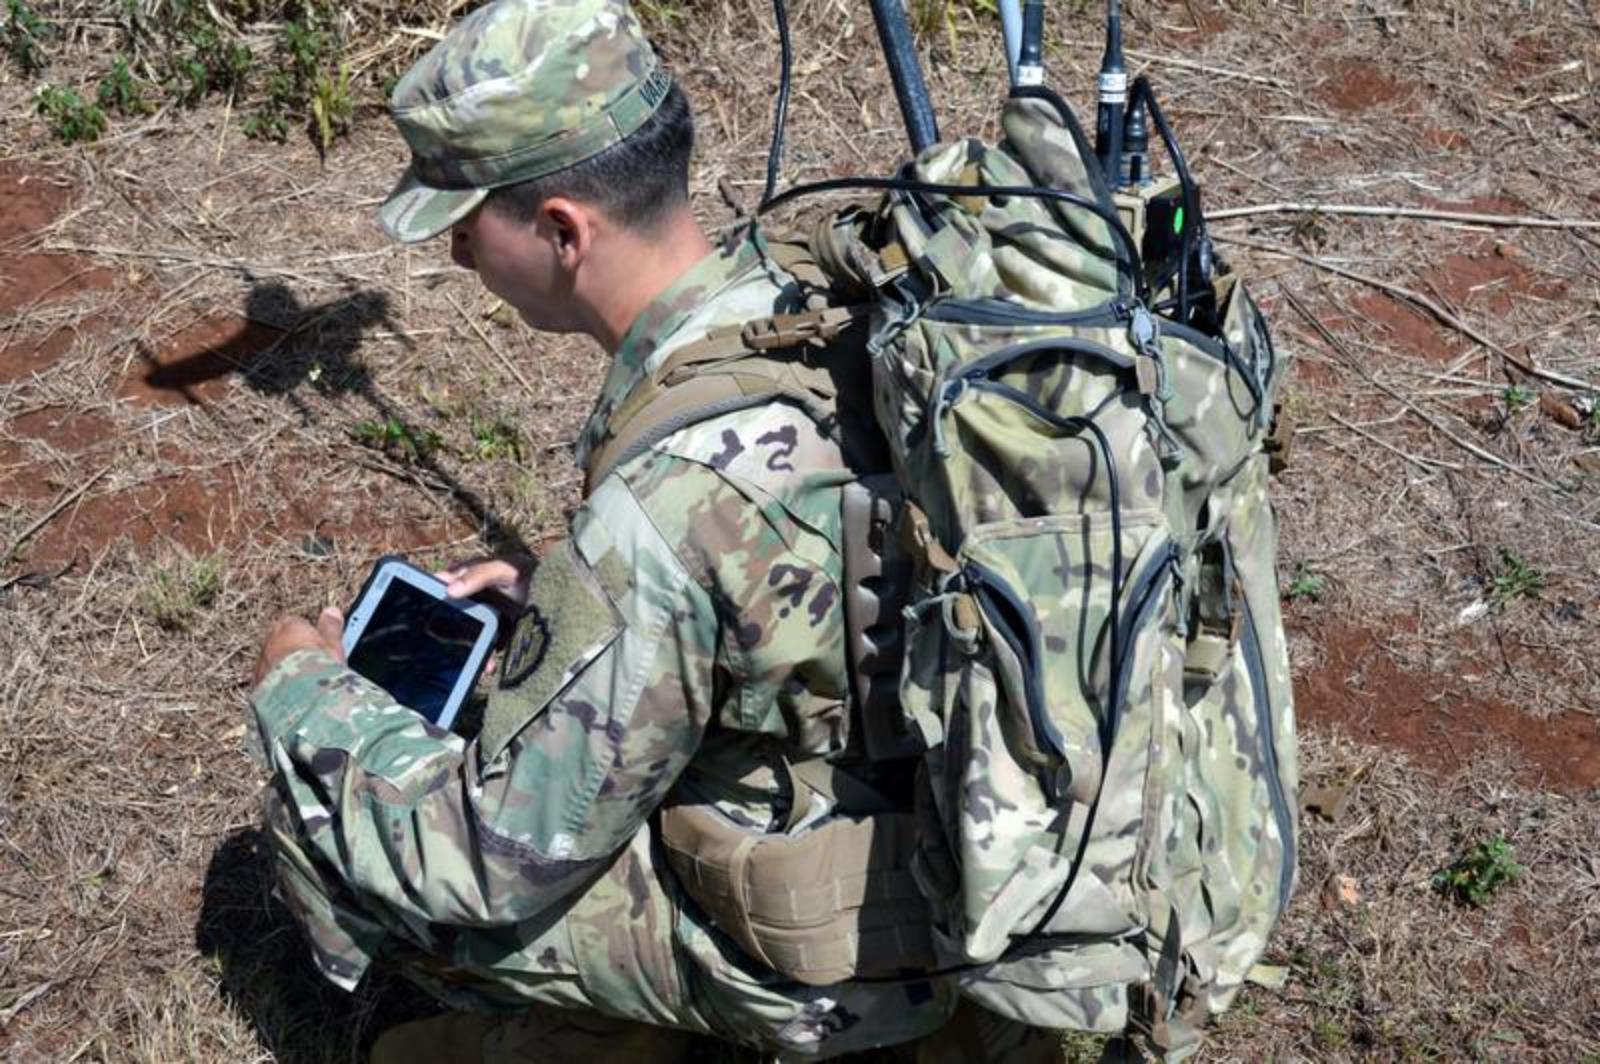 What do soldiers need for electronic warfare?